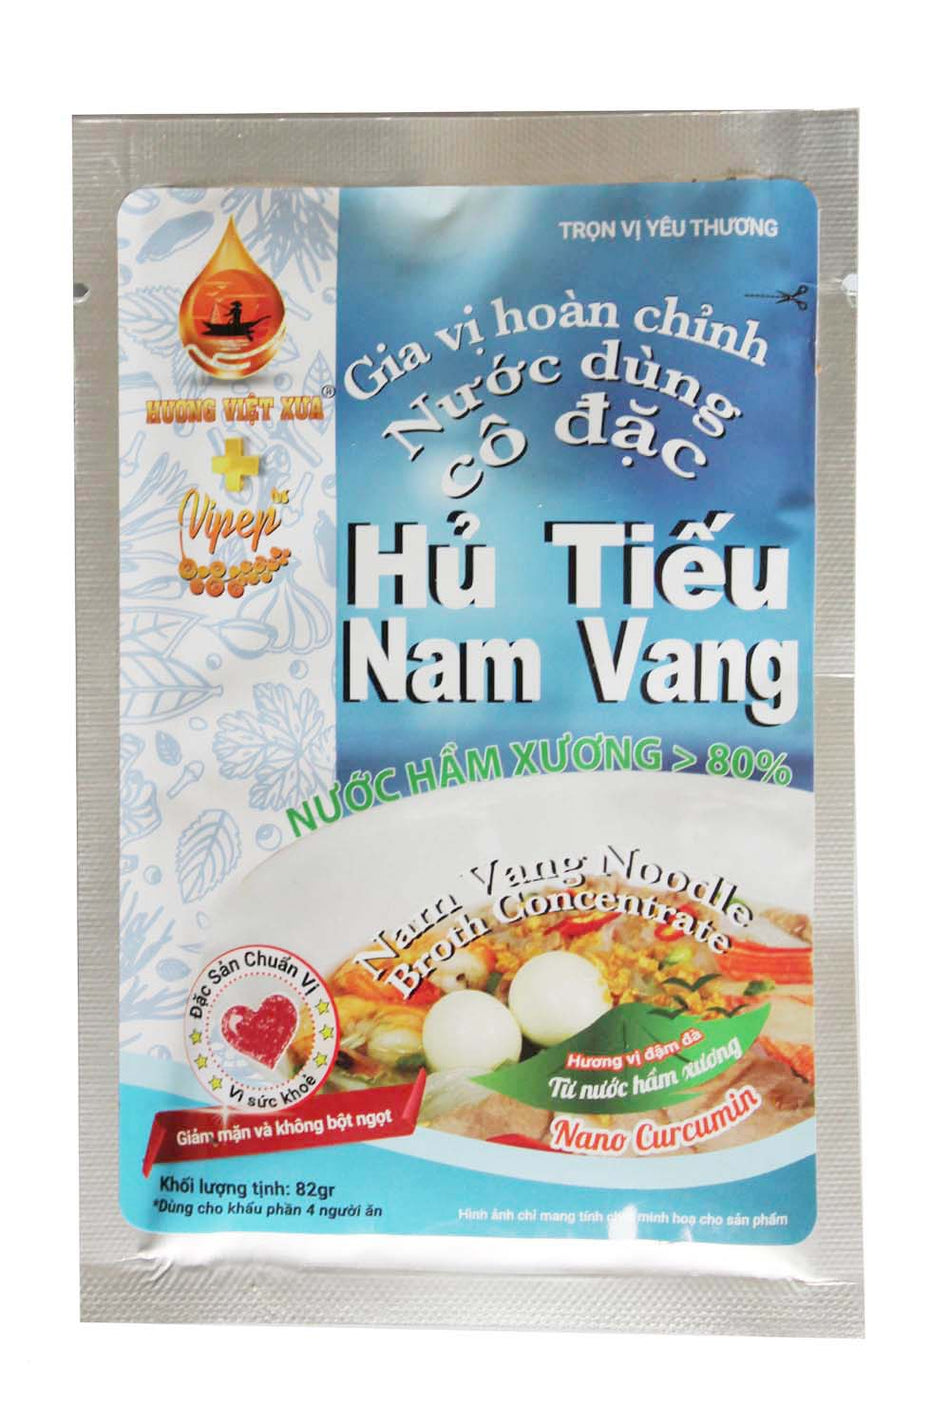 Yipep Cambodian  Noodle  Sauce